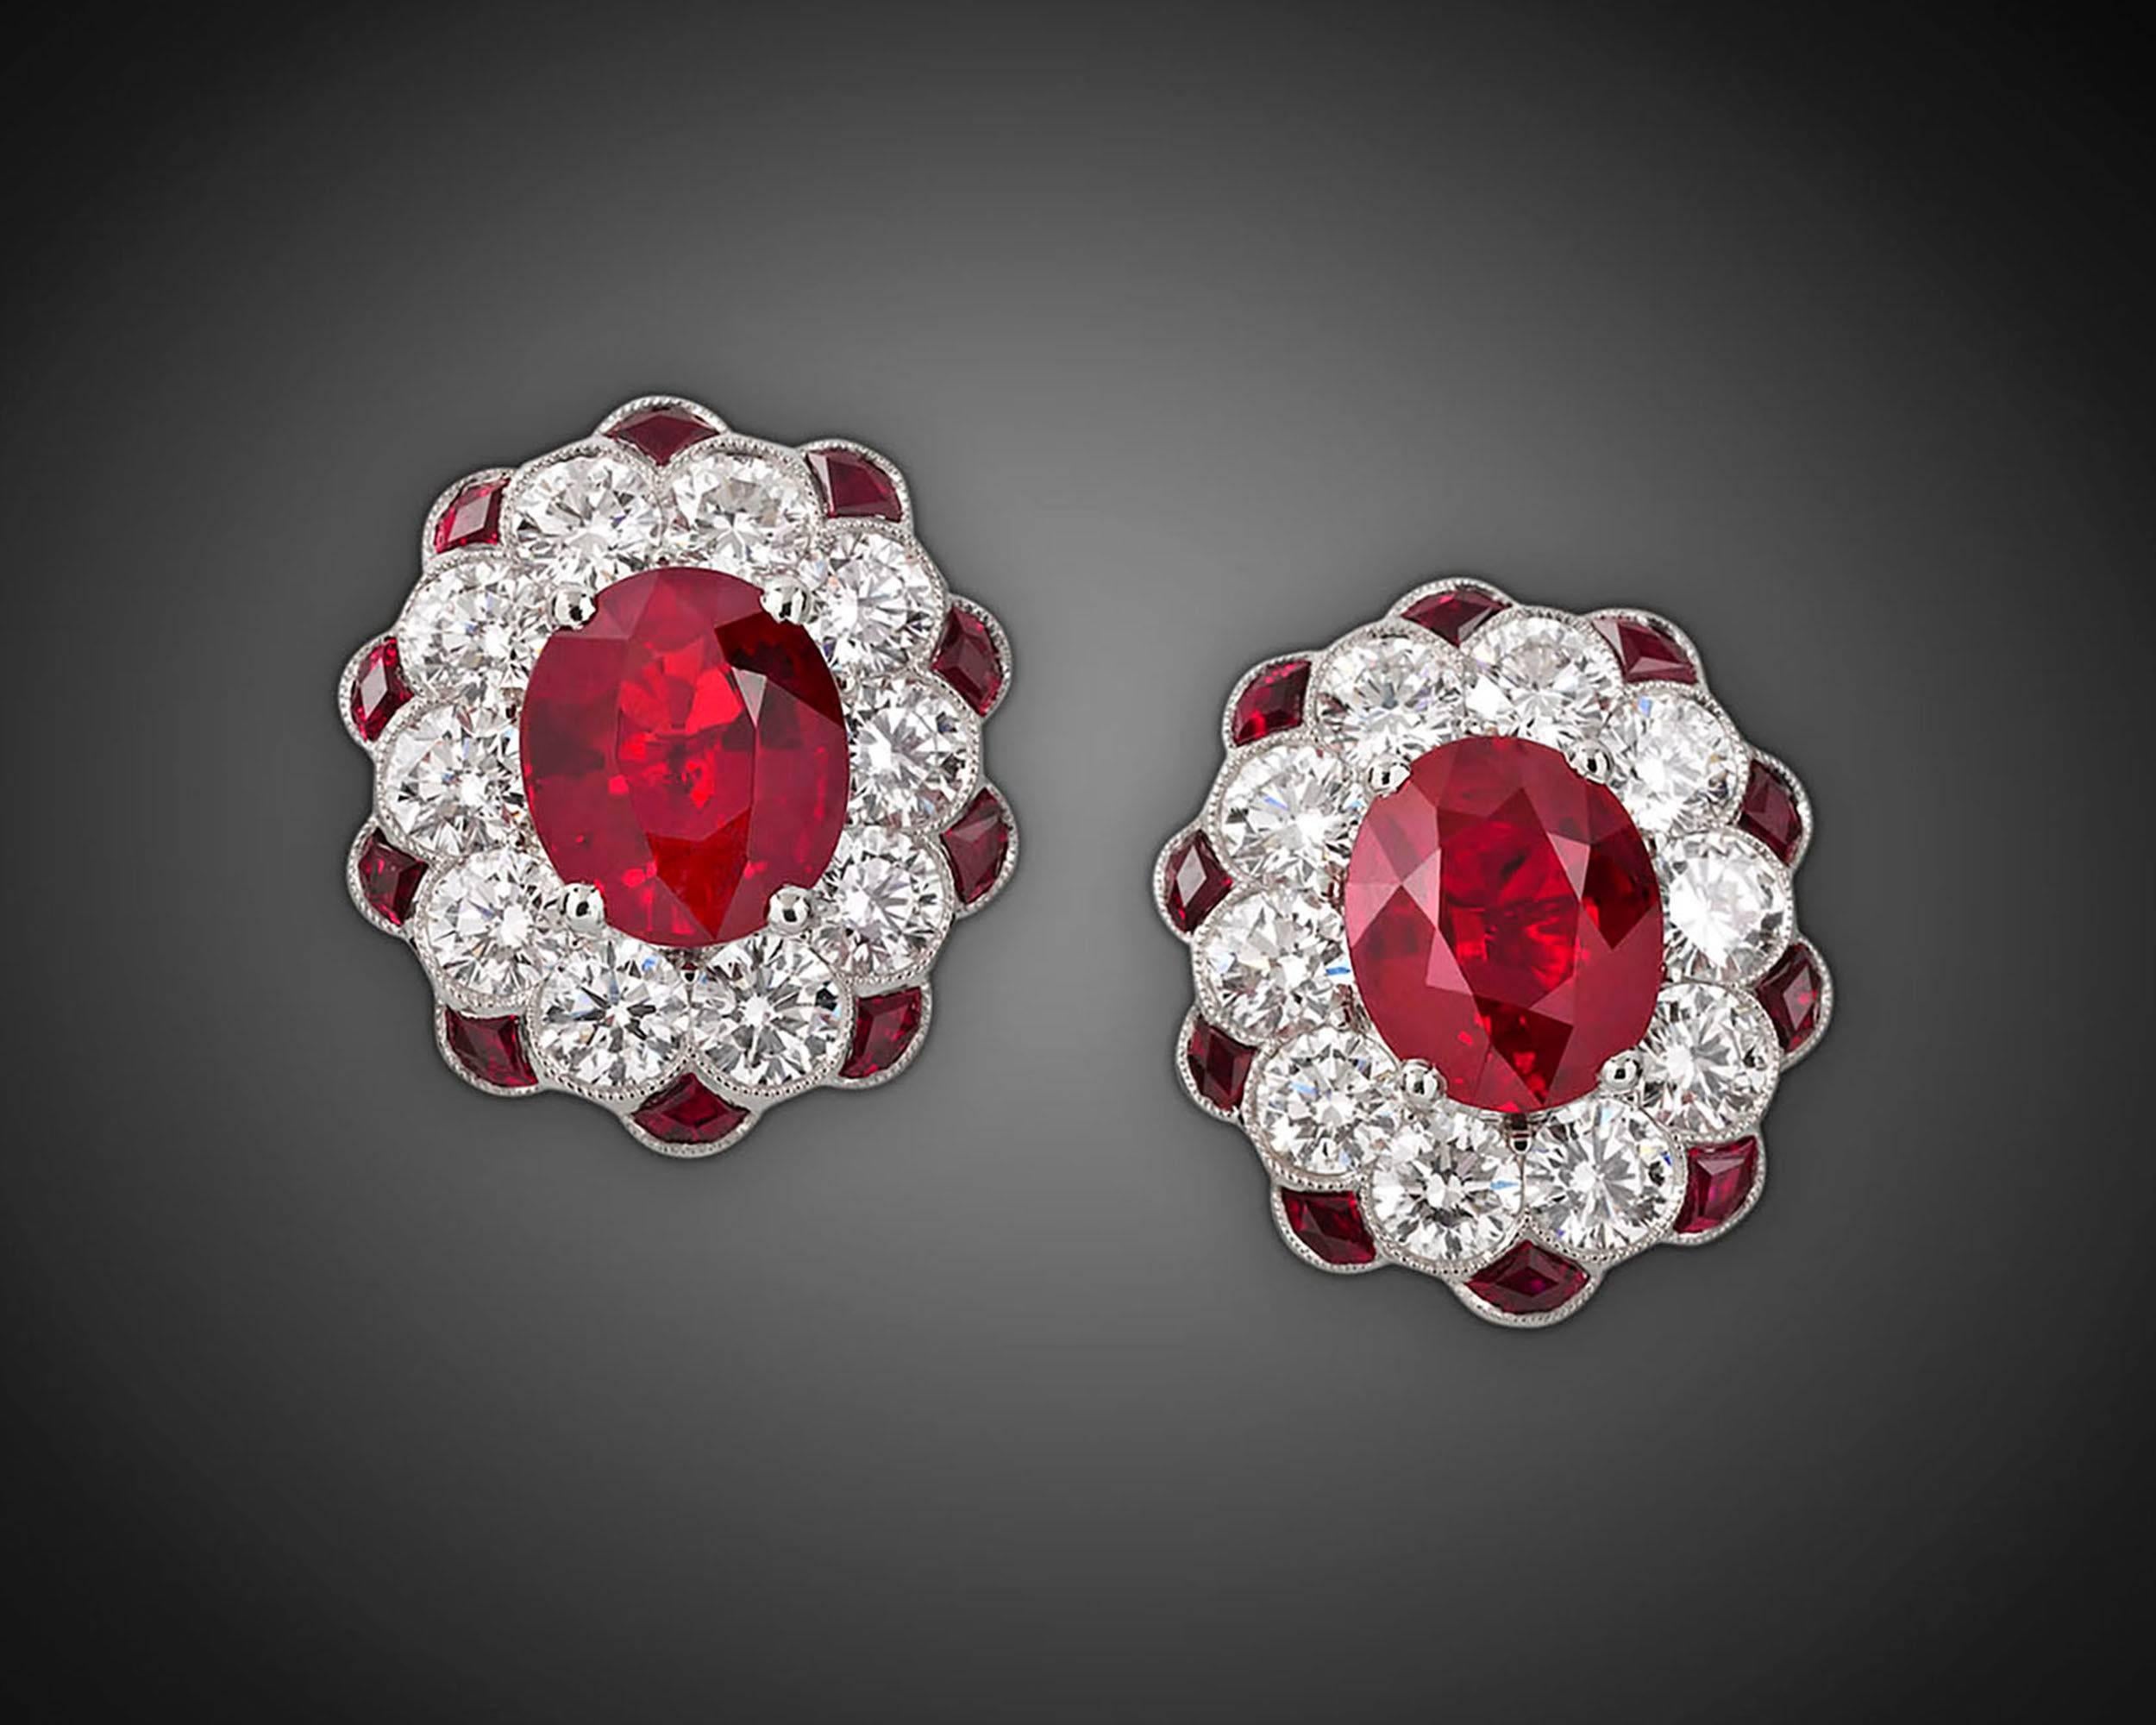 Stunning pigeon-blood red Burma rubies weighing a combined 2.64 carats dazzle in these timelessly classic earrings. The rare, richly colored jewels are accompanied by 1.60 total carats of white diamonds that add exceptional brilliance to the